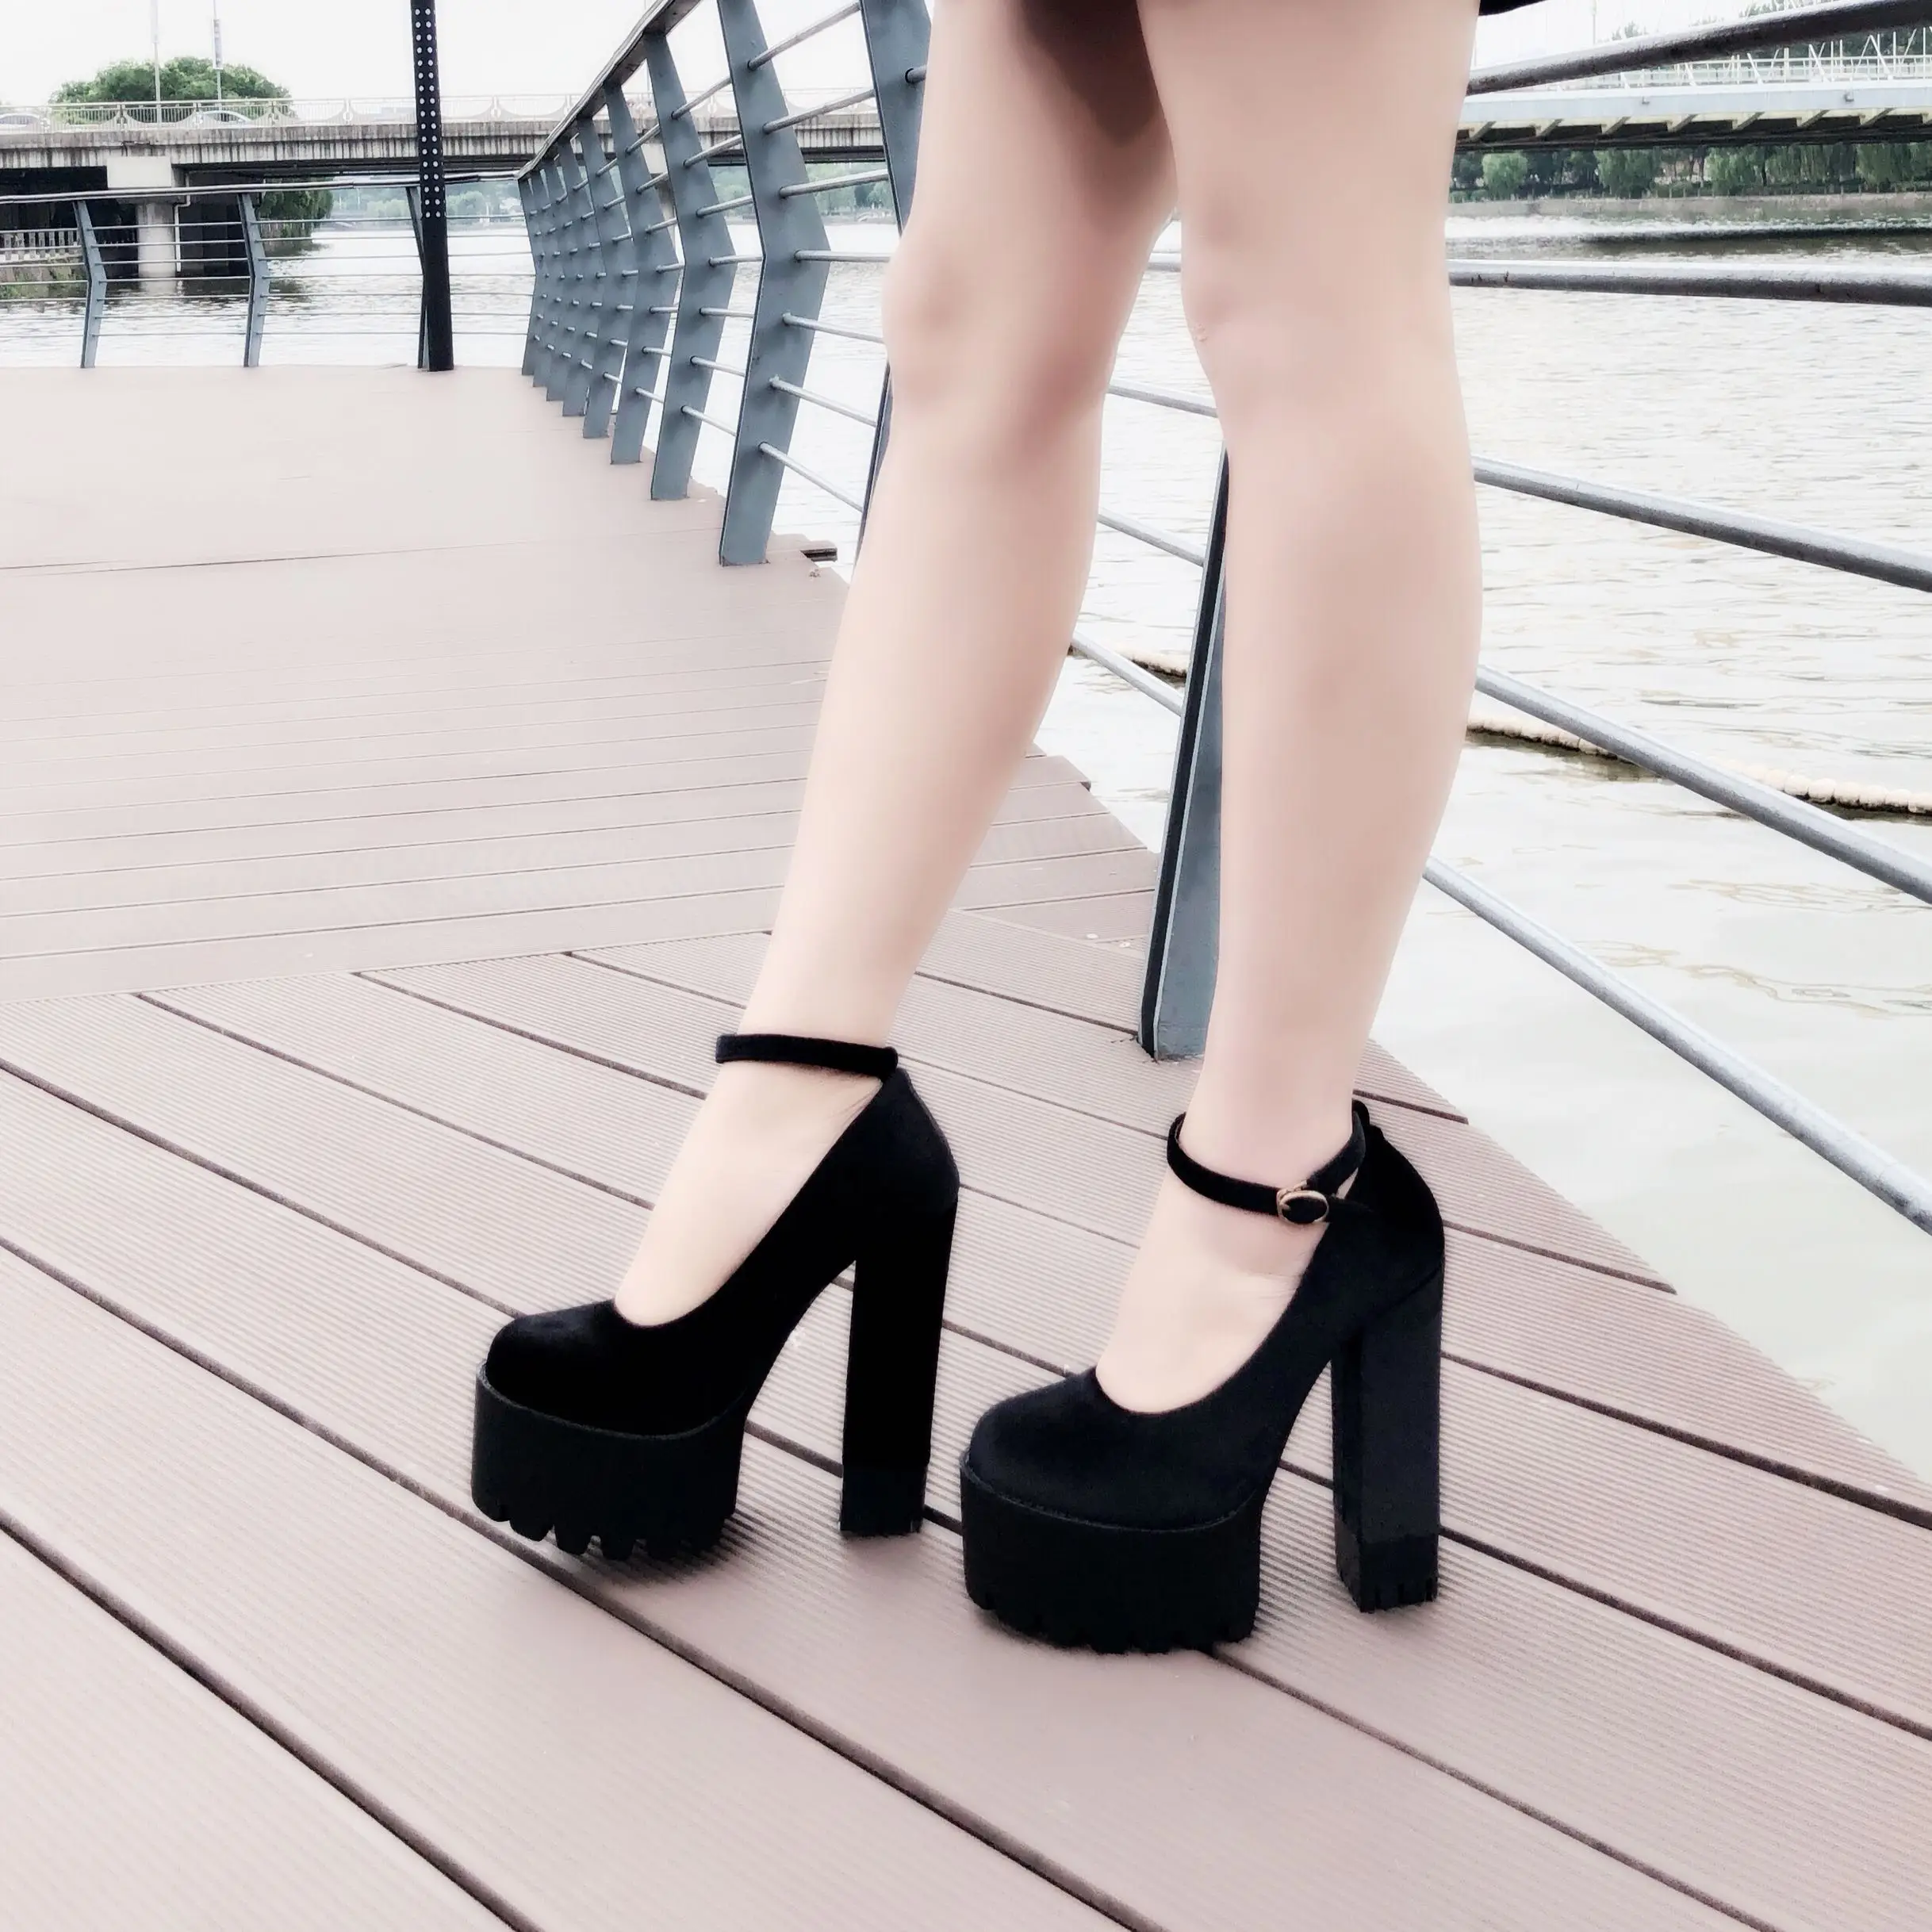 diary bowl hot Womens Shoes 2019 New Small Fresh High Heels Thick With Single Shoes 15 Cm  Super High Heels Sexy Waterproof Platform Party Pumps - Pumps - AliExpress